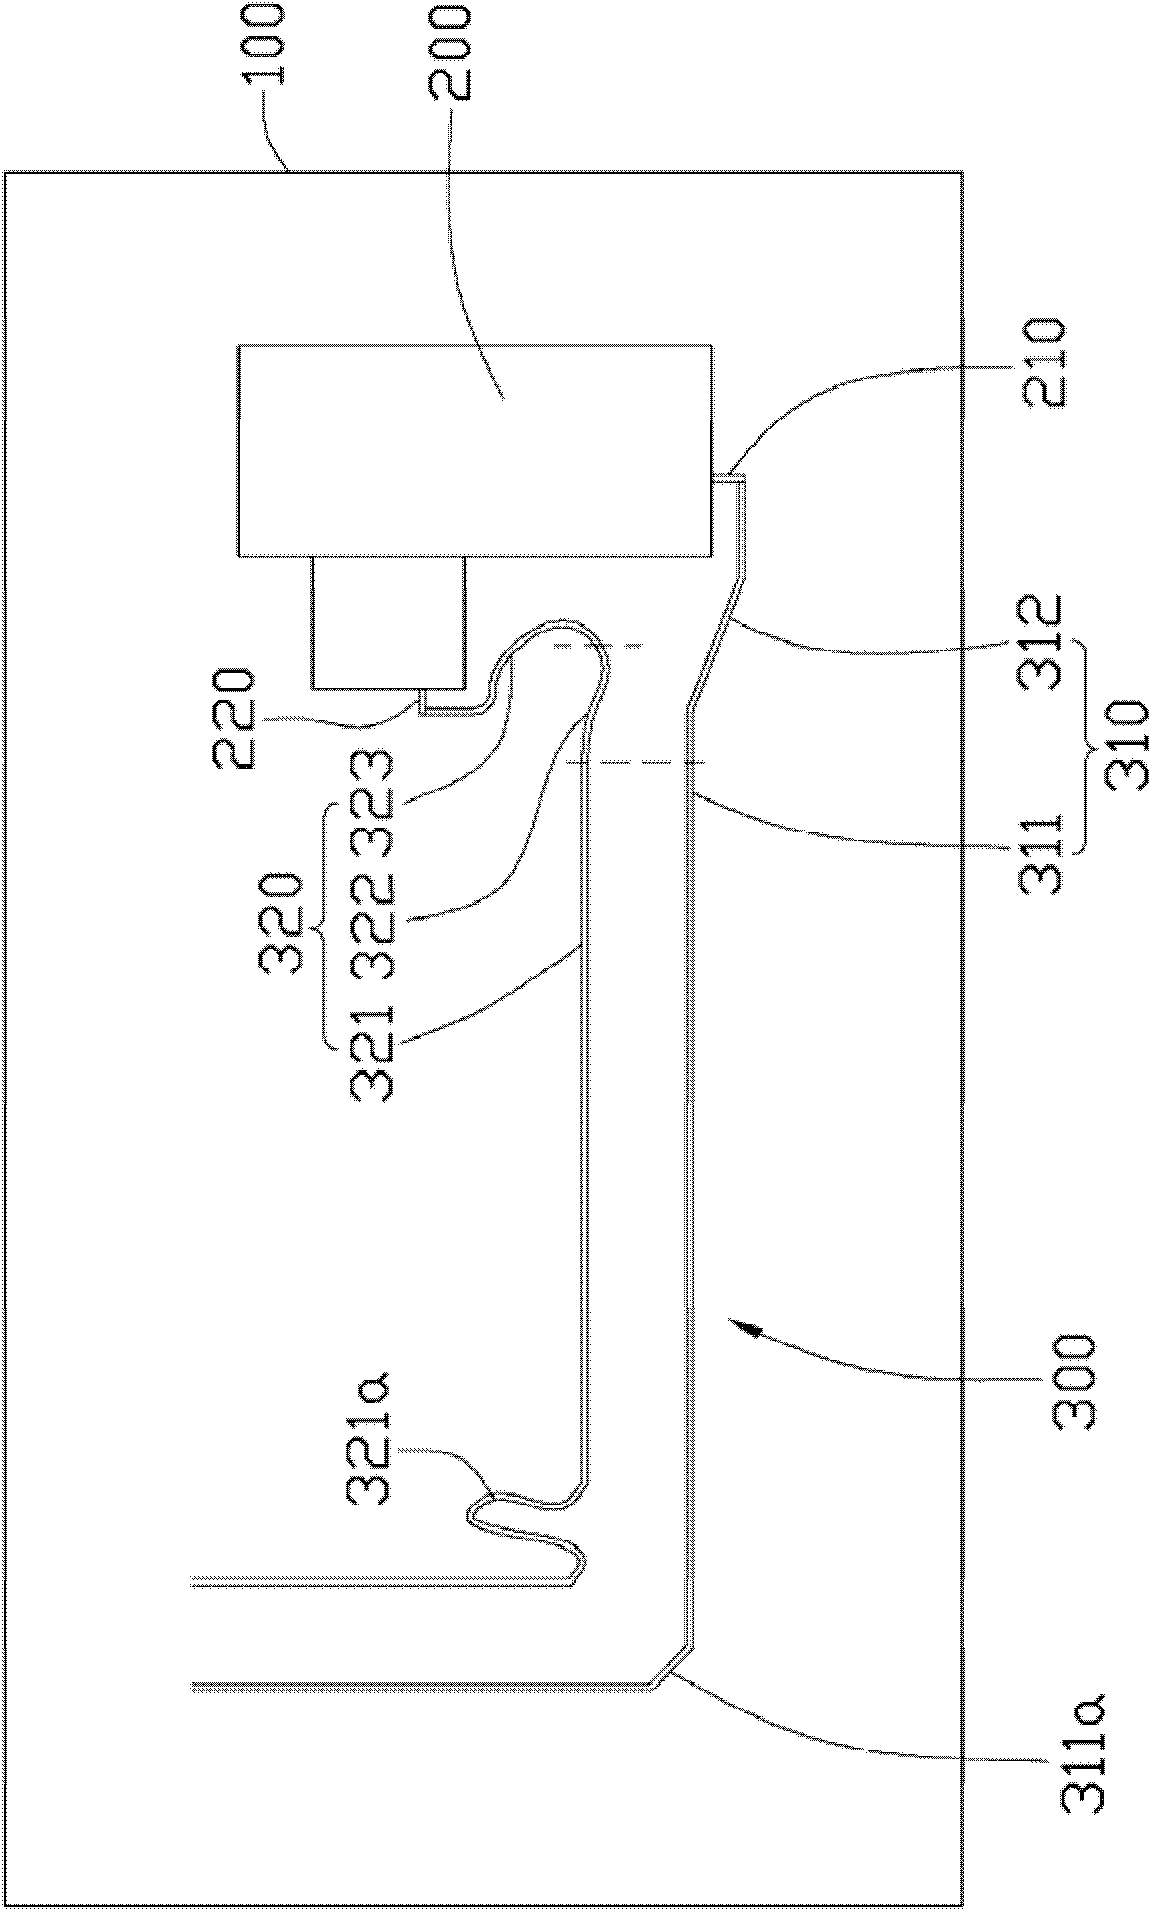 Printed circuit board and differential wire wiring method